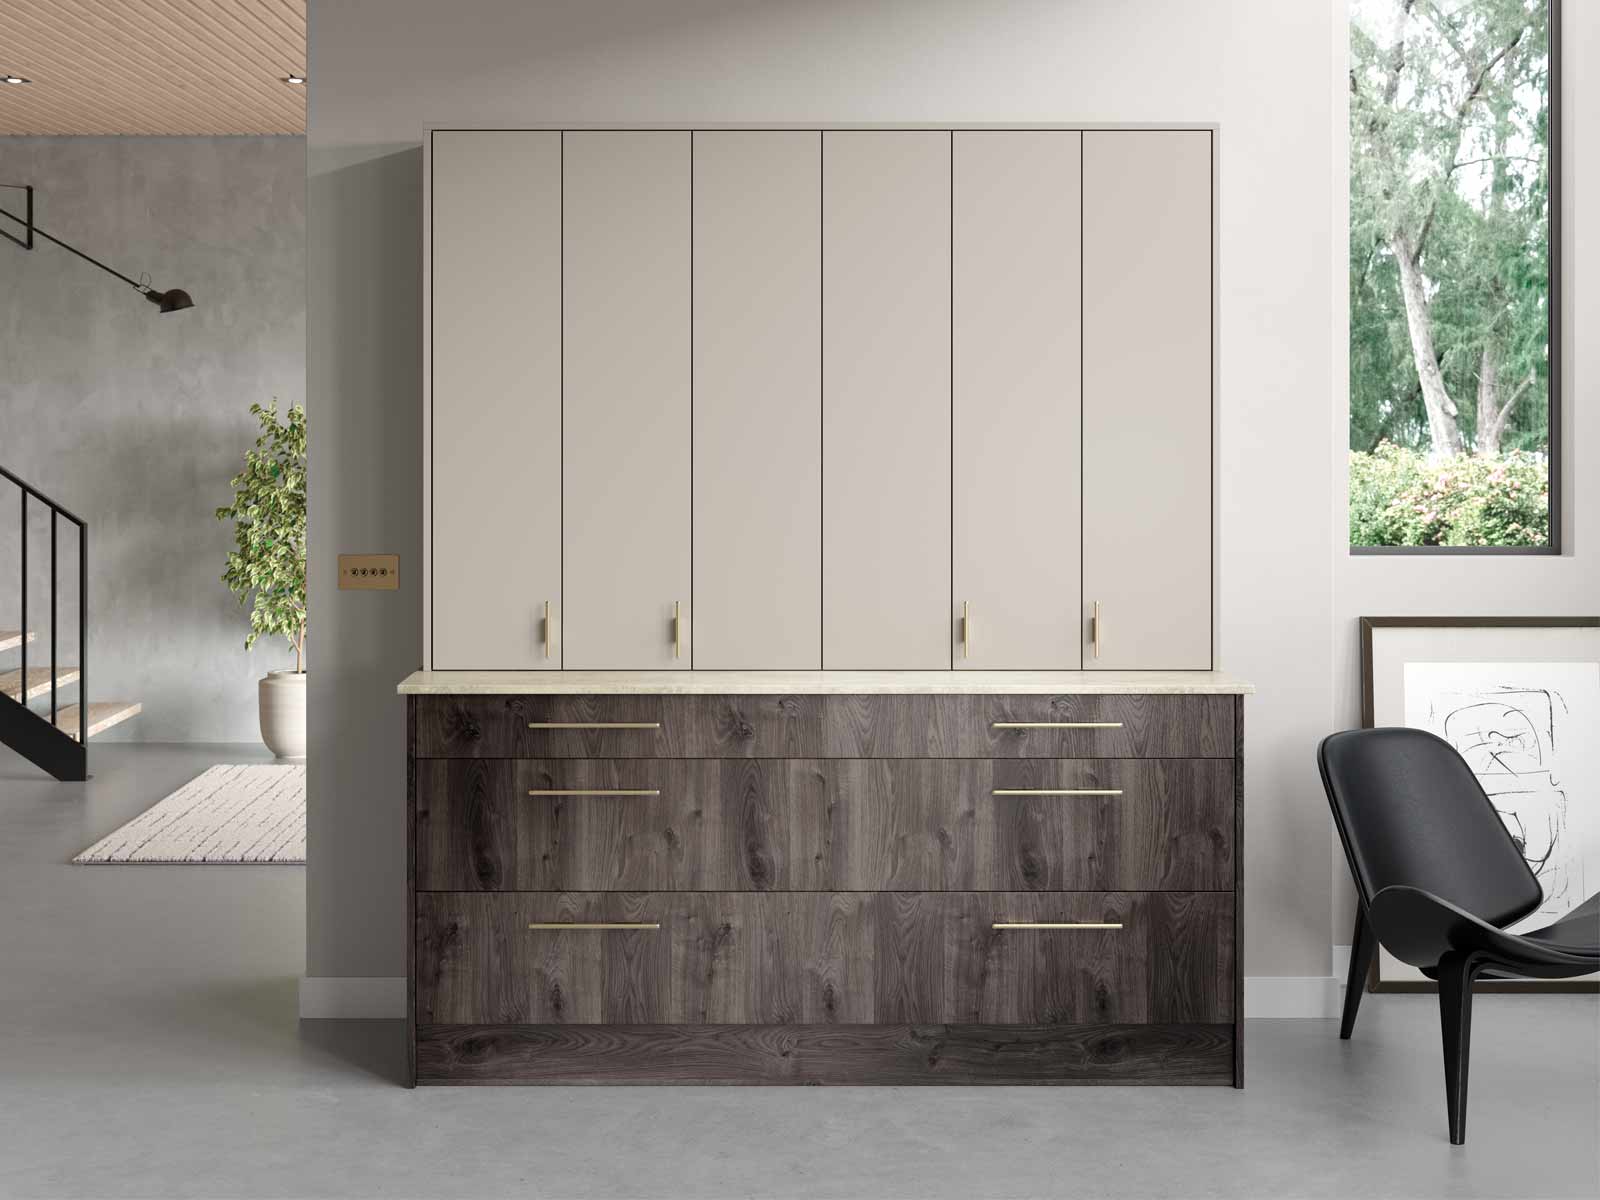 A Breakfast Dresser with closed wingline doors, a worktop and Hoxton Oak